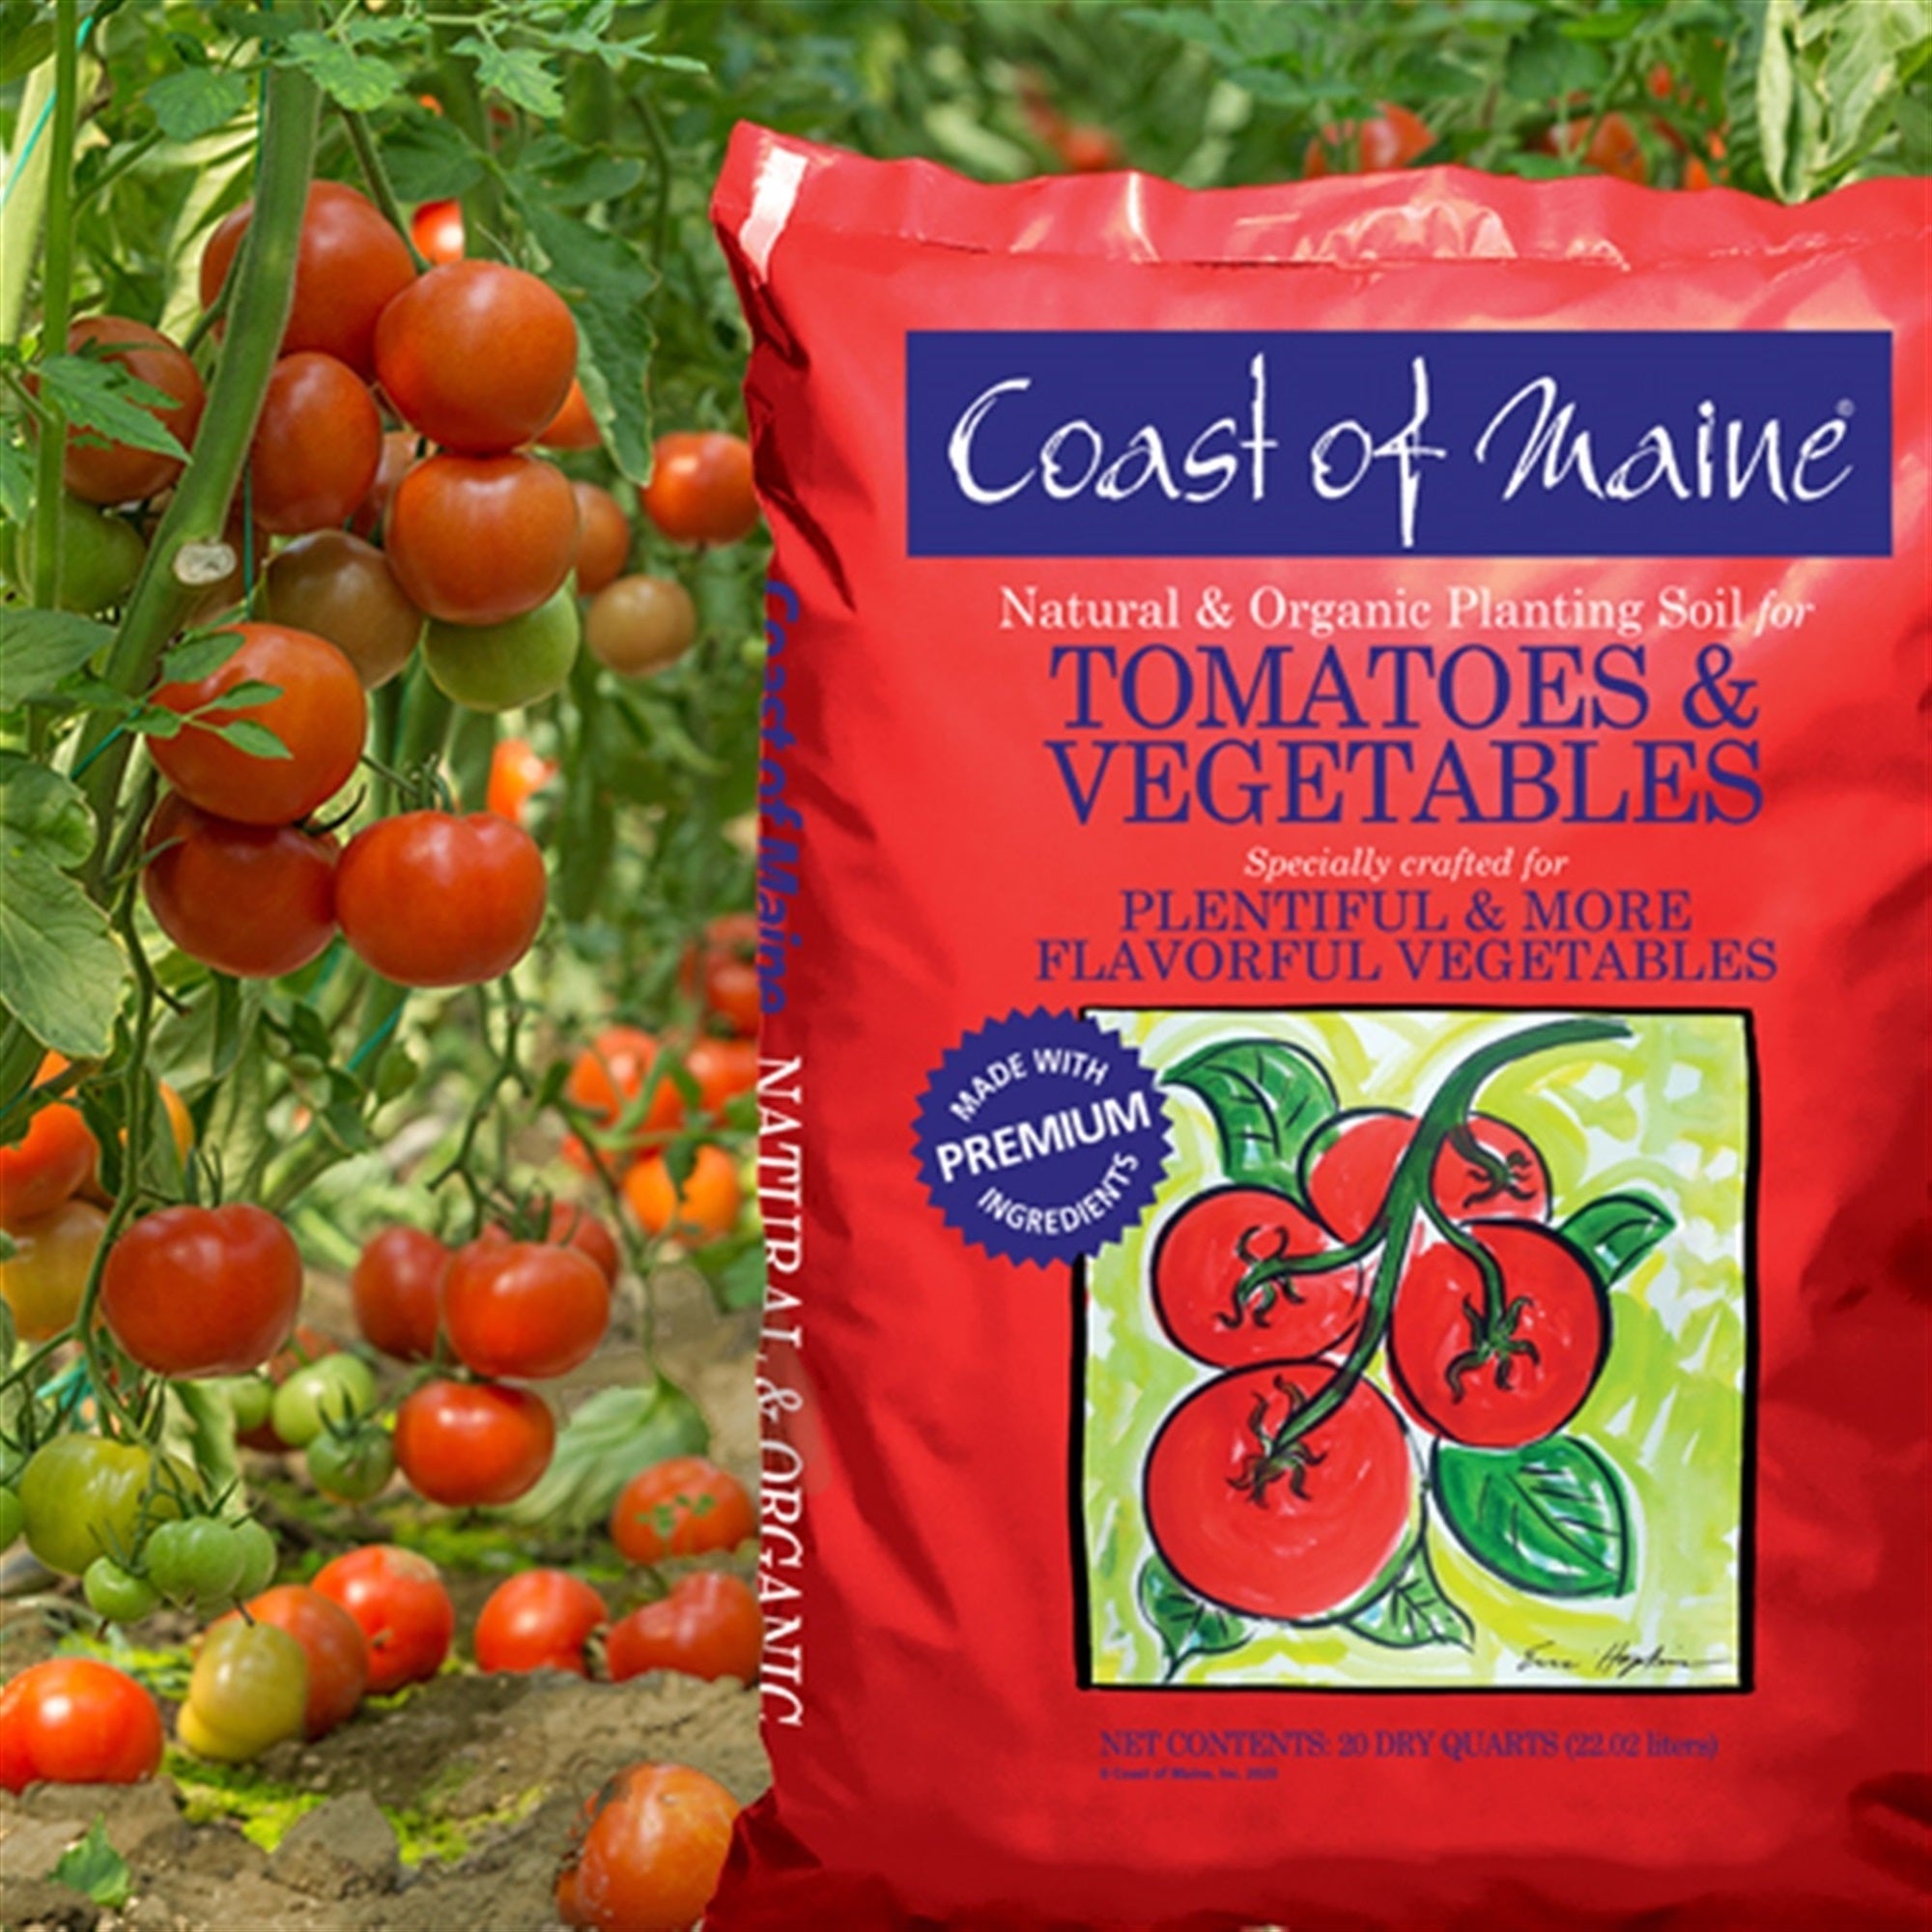 Coast of Maine Organic & Natural Planting Soil for Tomatoes & Vegetables, 20 QT